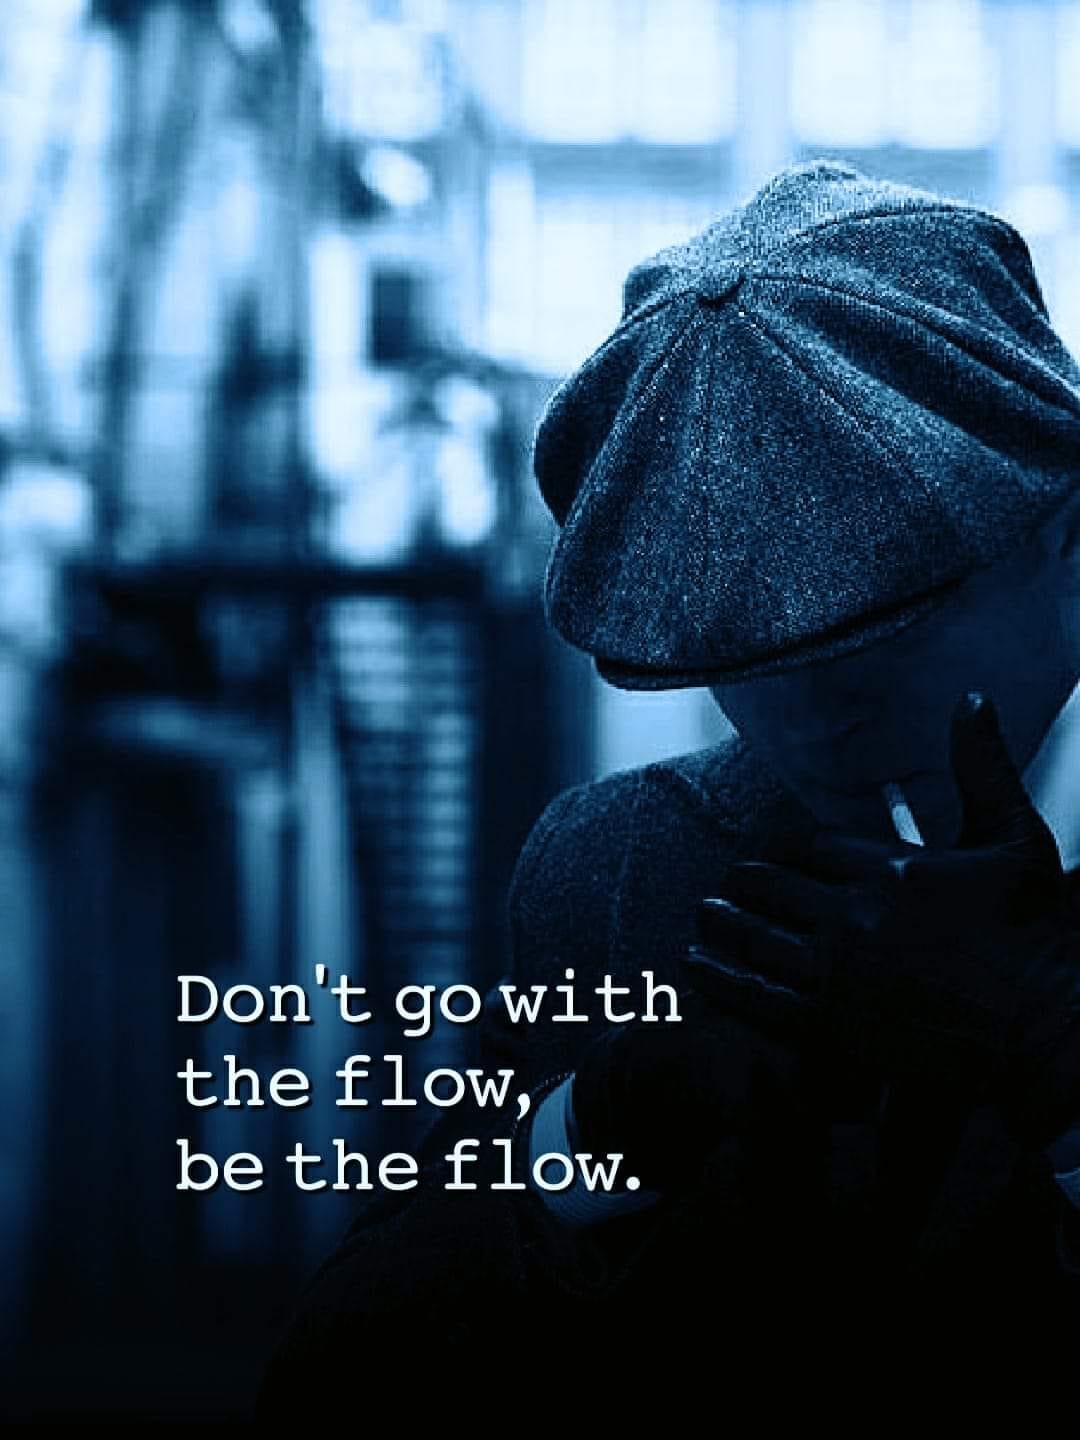 Do not go with the flow. Be the flow.